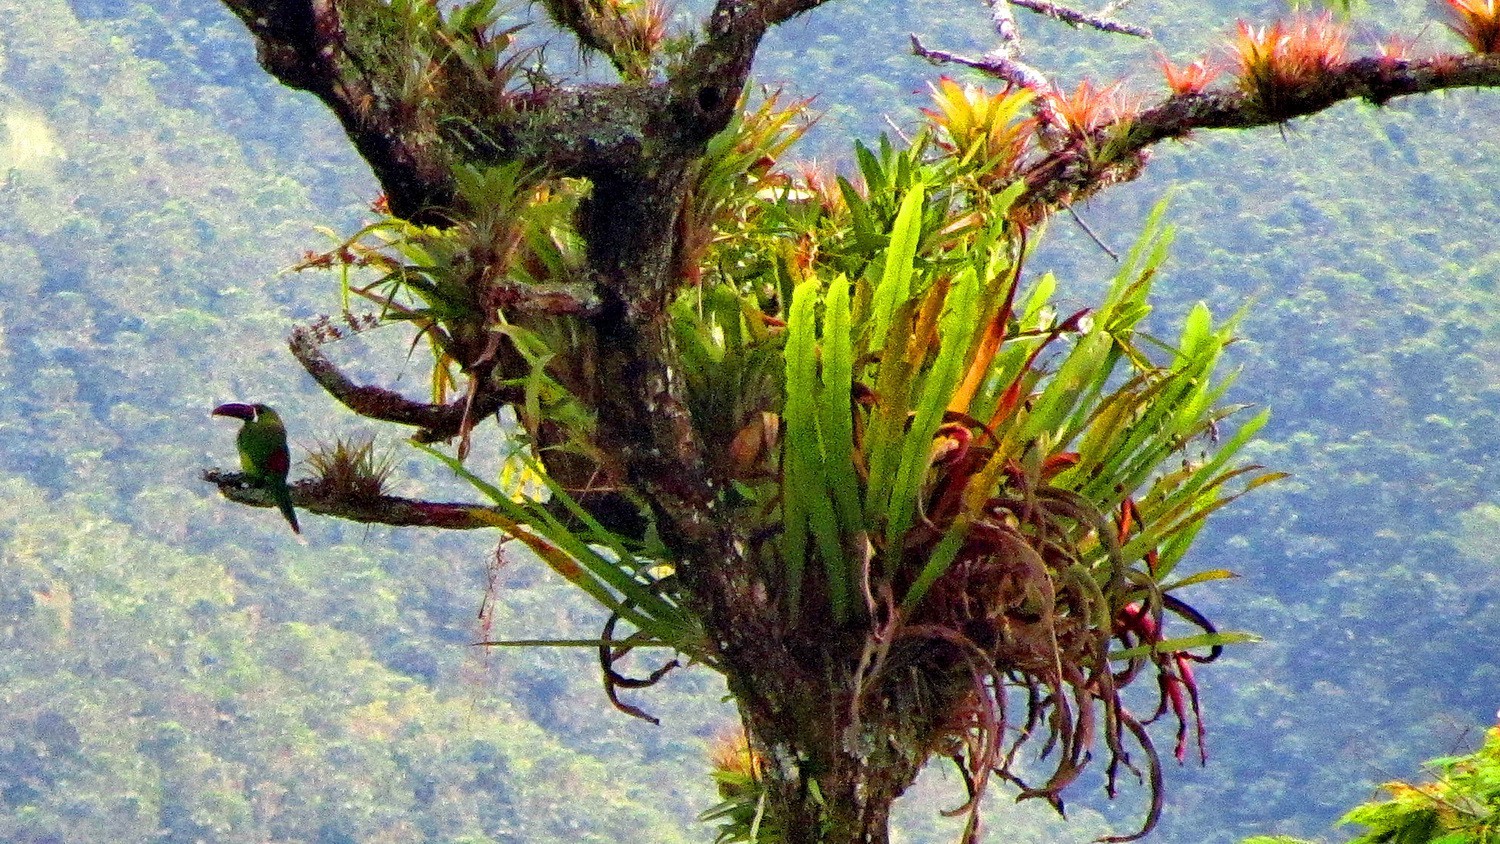 Green Toucan on the left branch